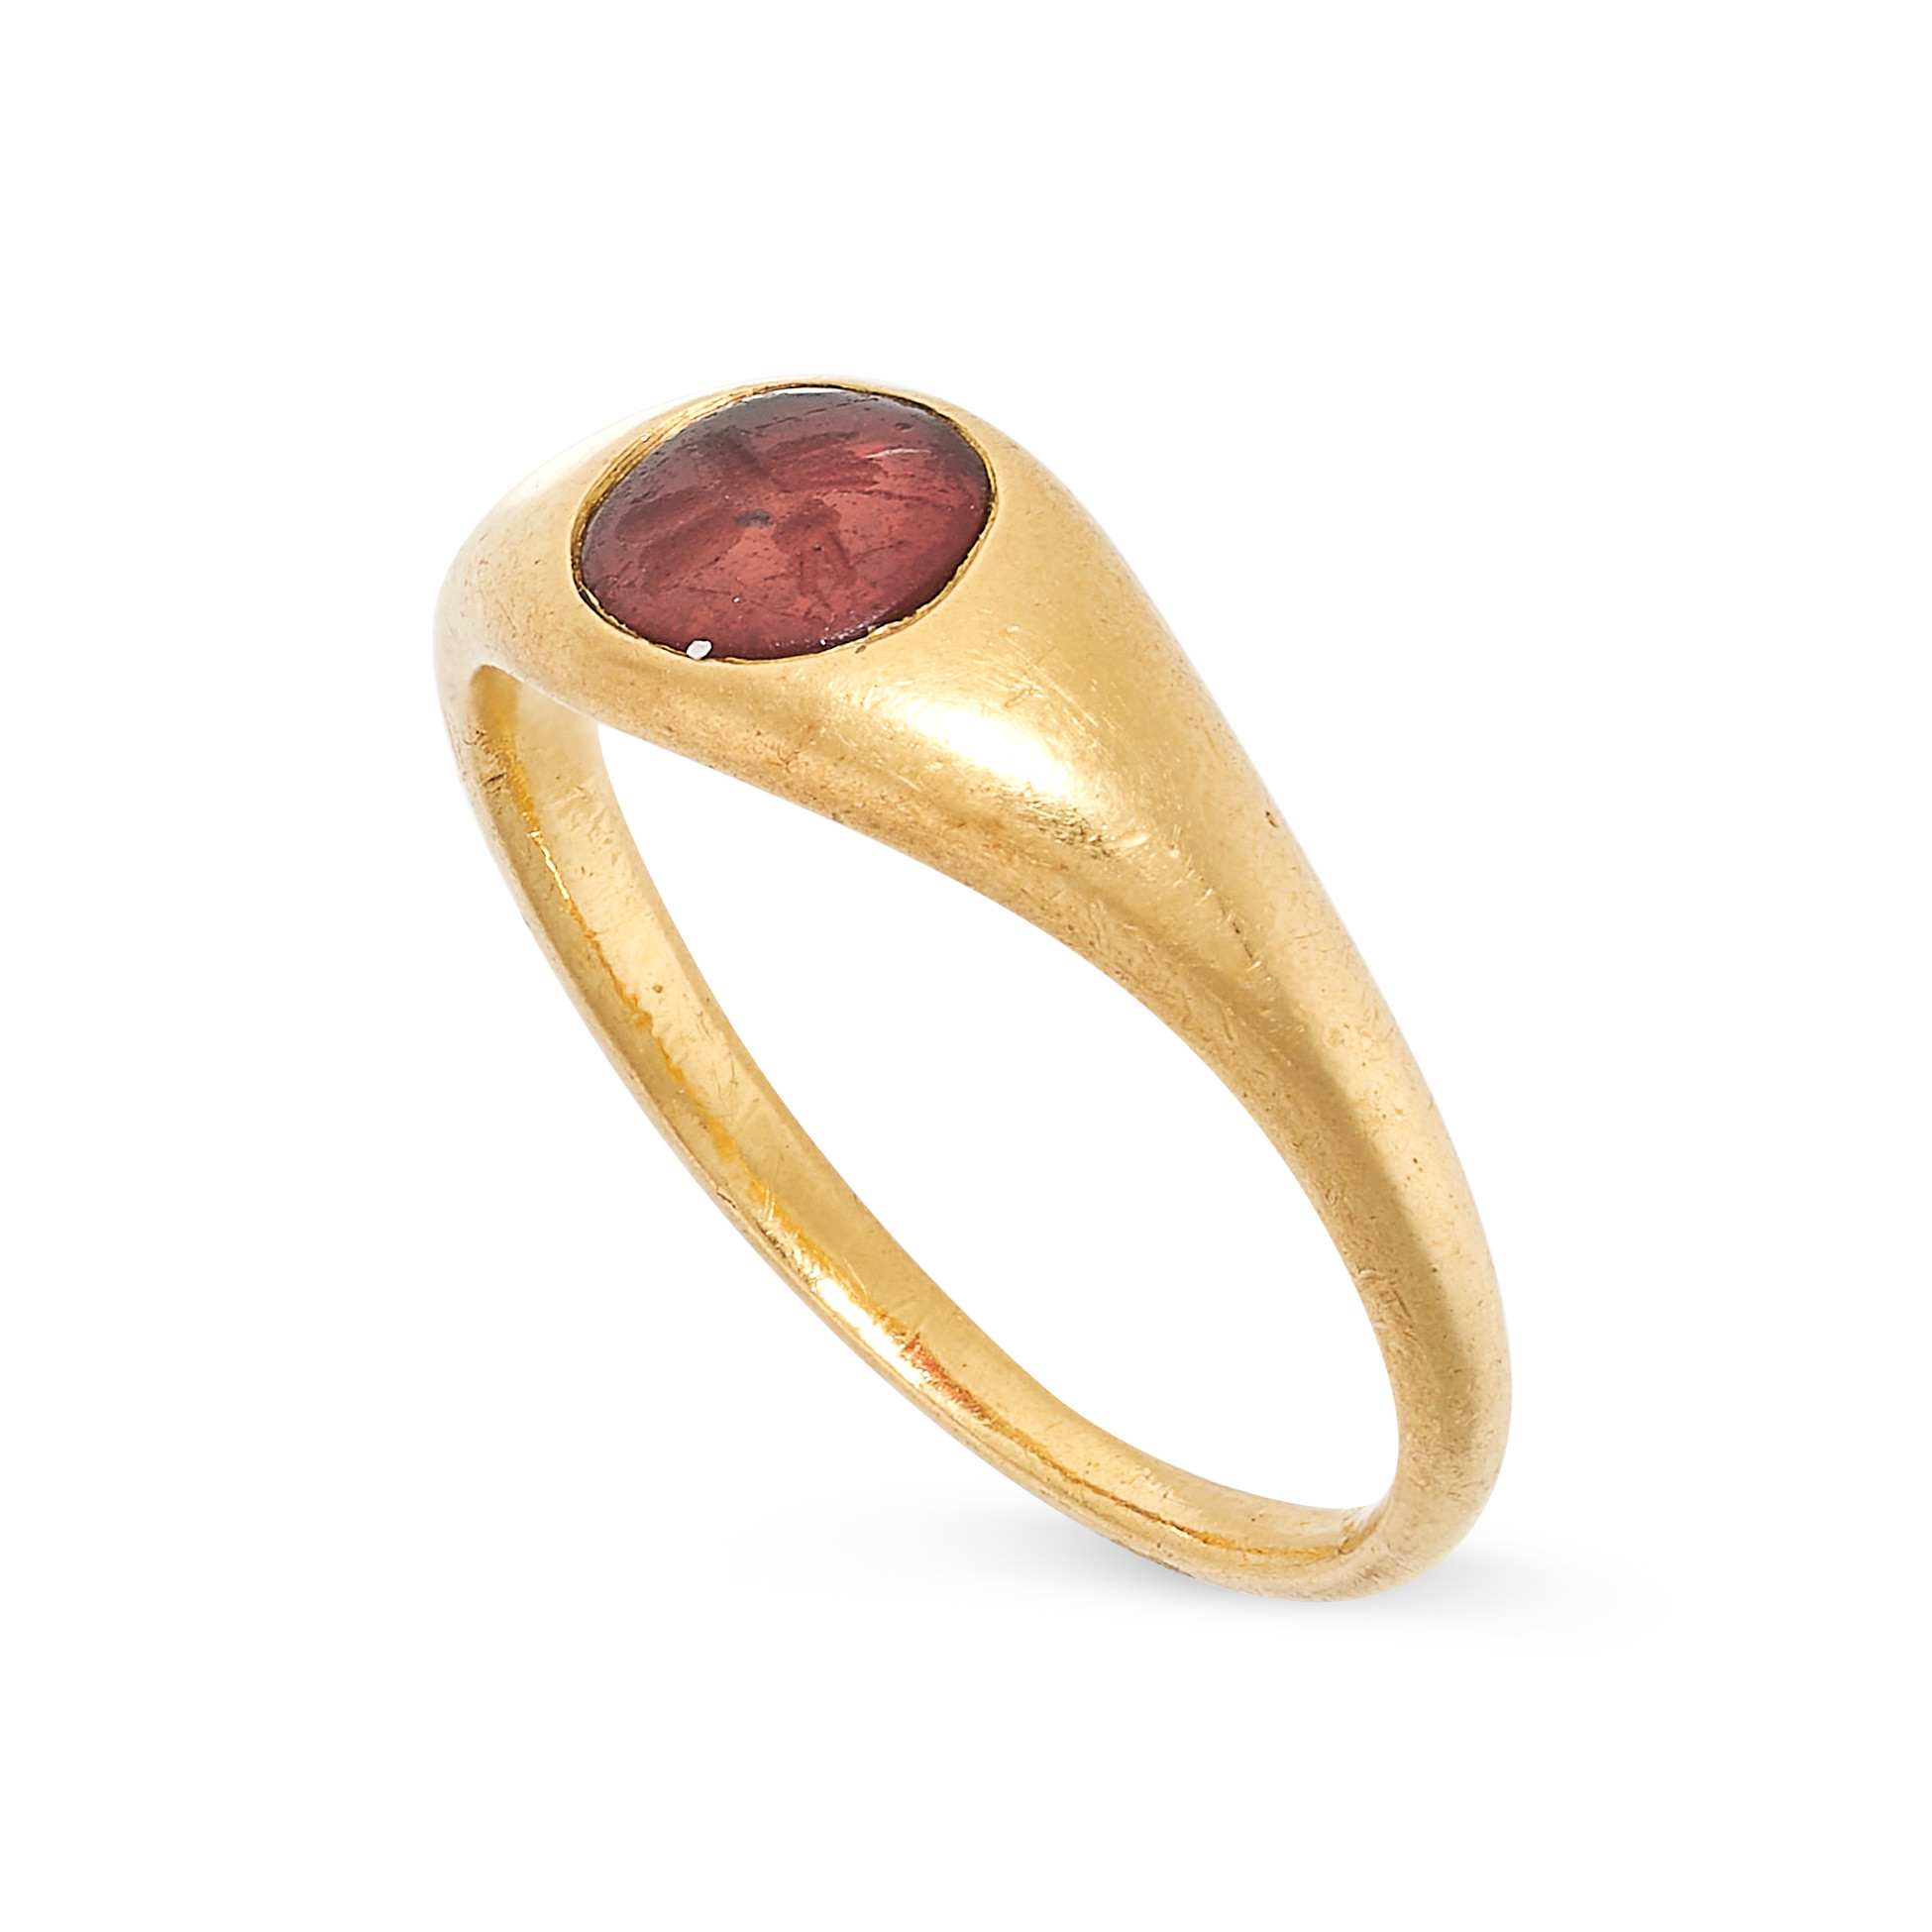 NO RESERVE - AN ANTIQUE RED GLASS INTAGLIO GYPSY RING, 19TH CENTURY in yellow gold, the tapering - Image 2 of 3